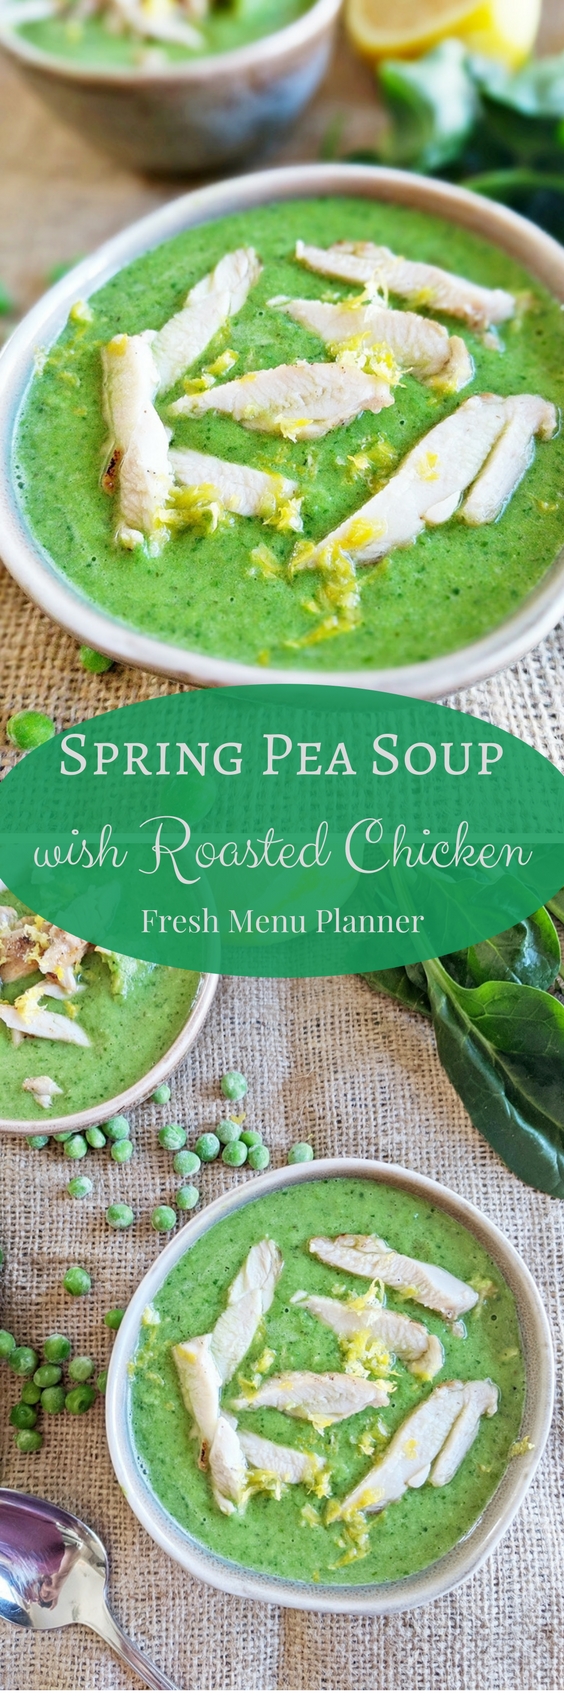 Spring Pea Soup with Chicken